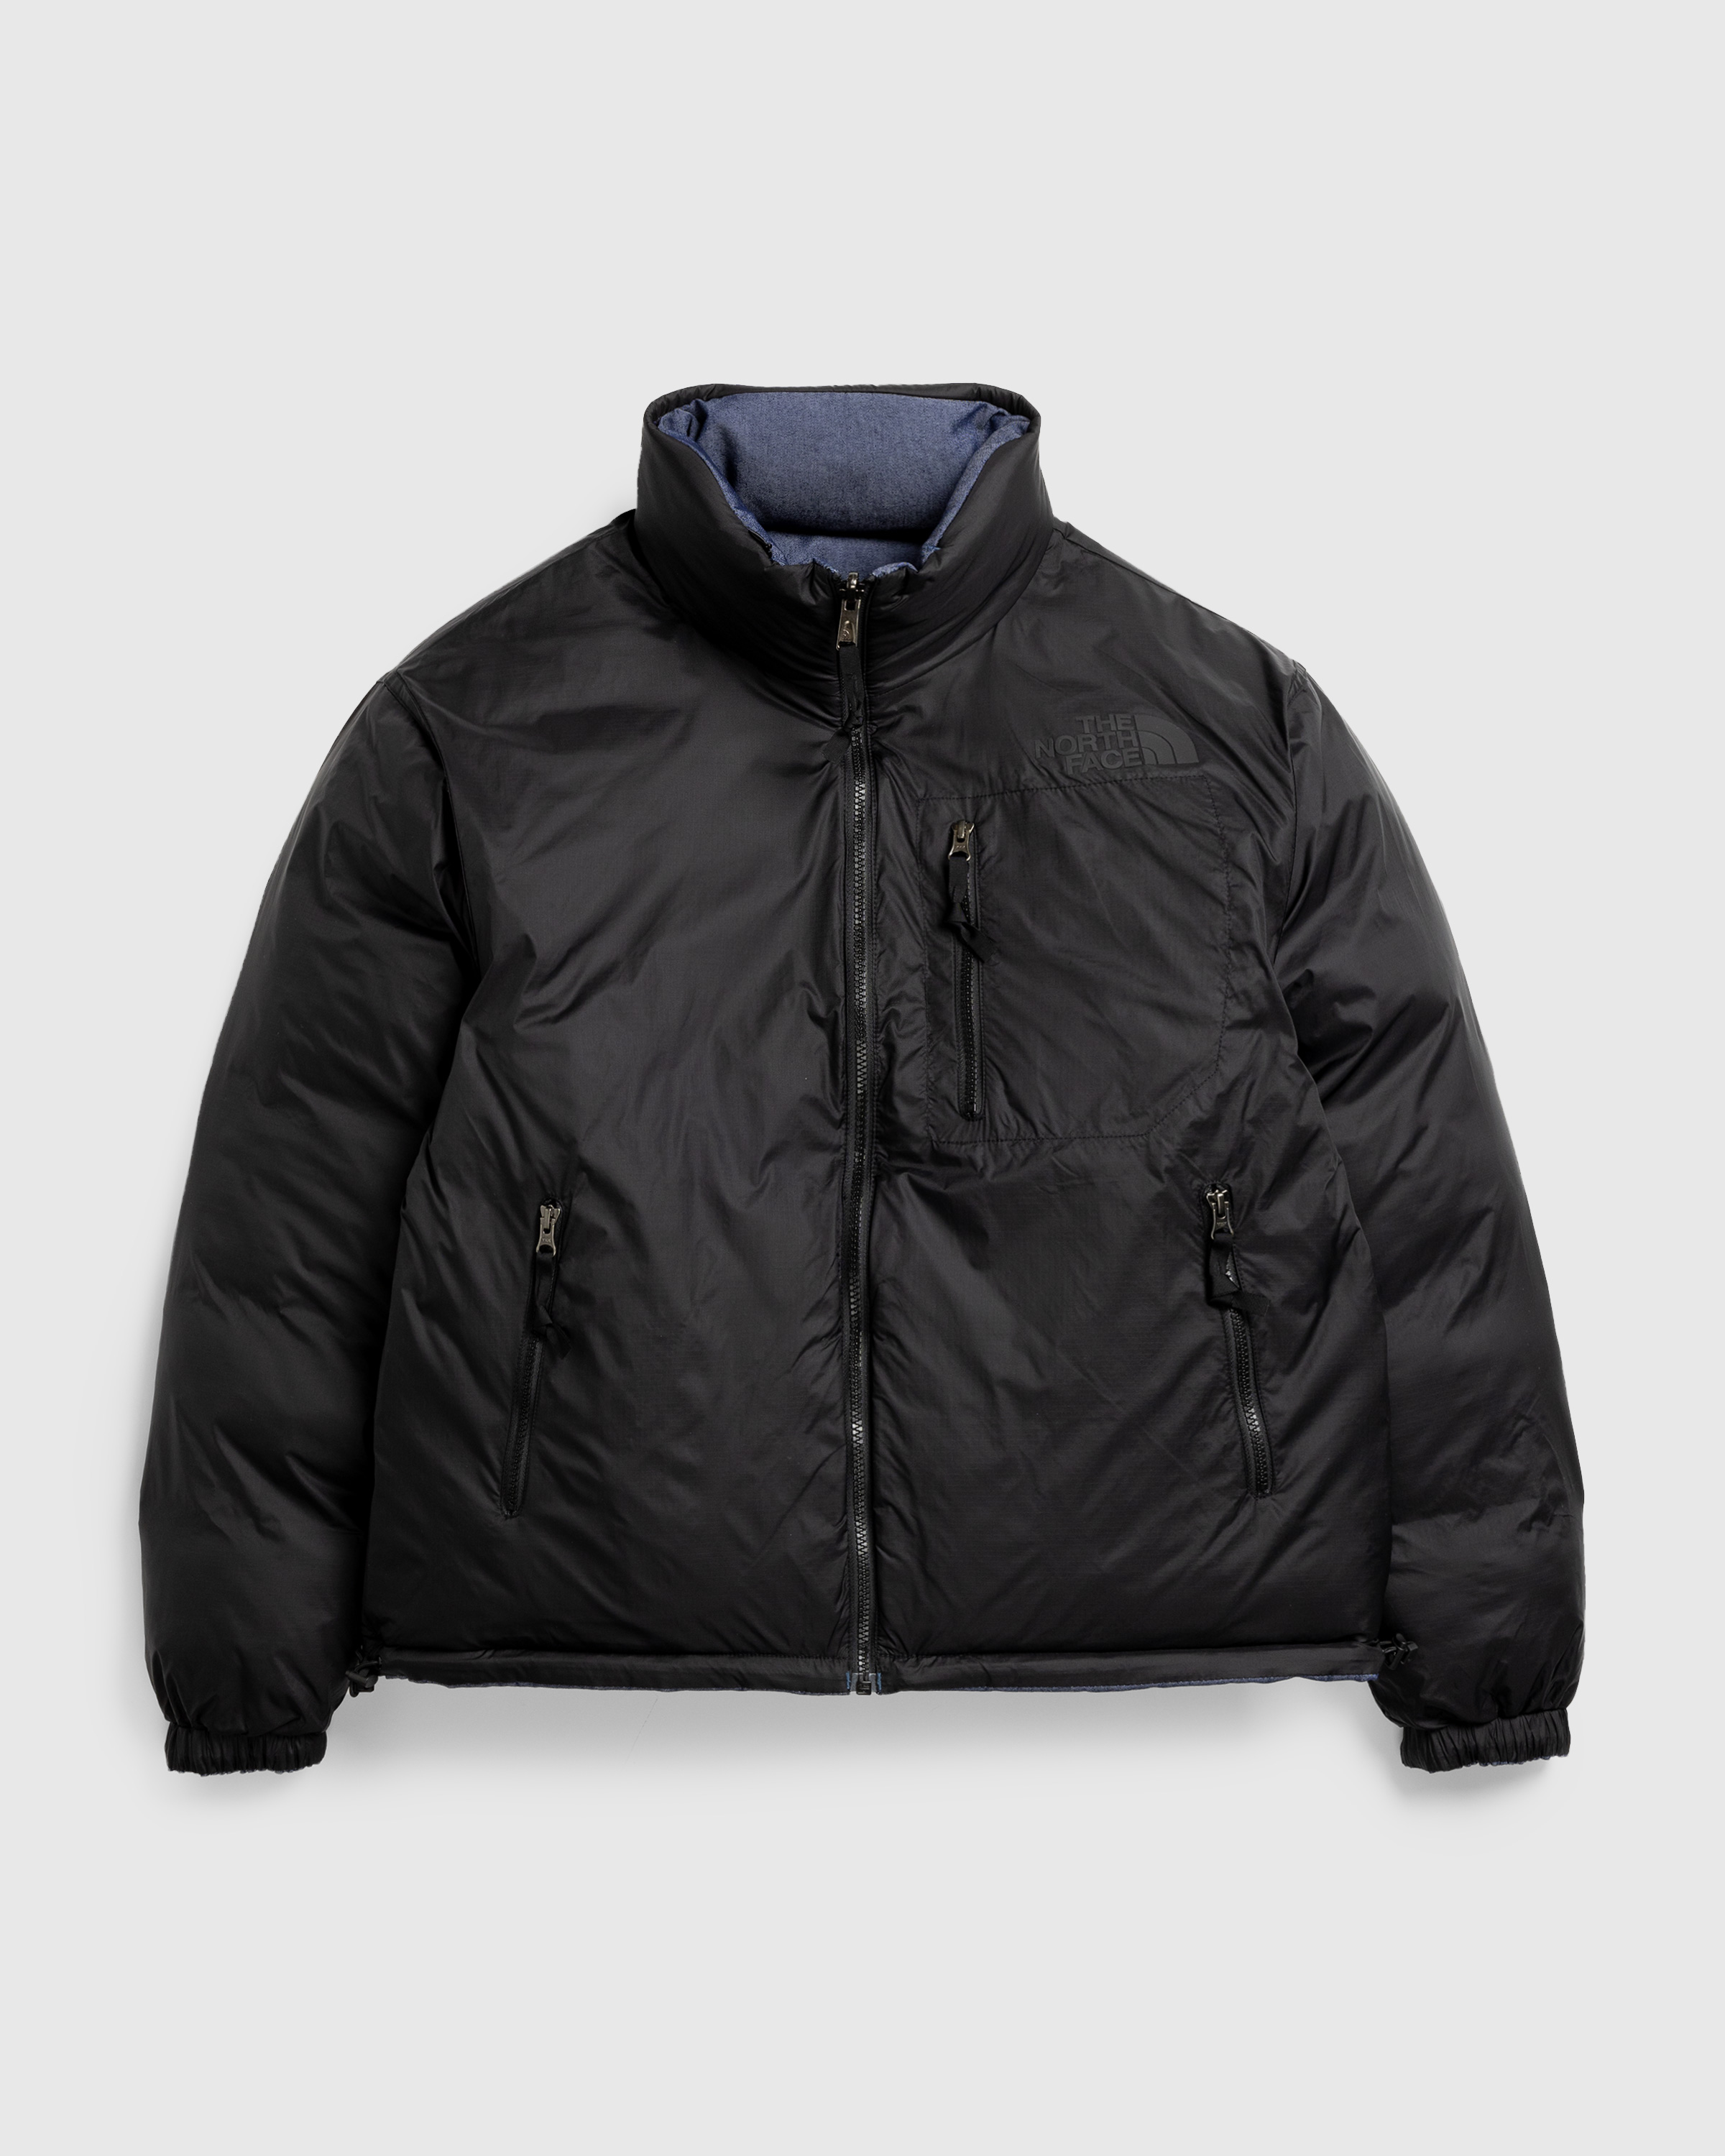 The North Face – ’92 Reversible Nuptse Jacket Sulphur Moss/Coal Brown-2 - Outerwear - Blue - Image 2